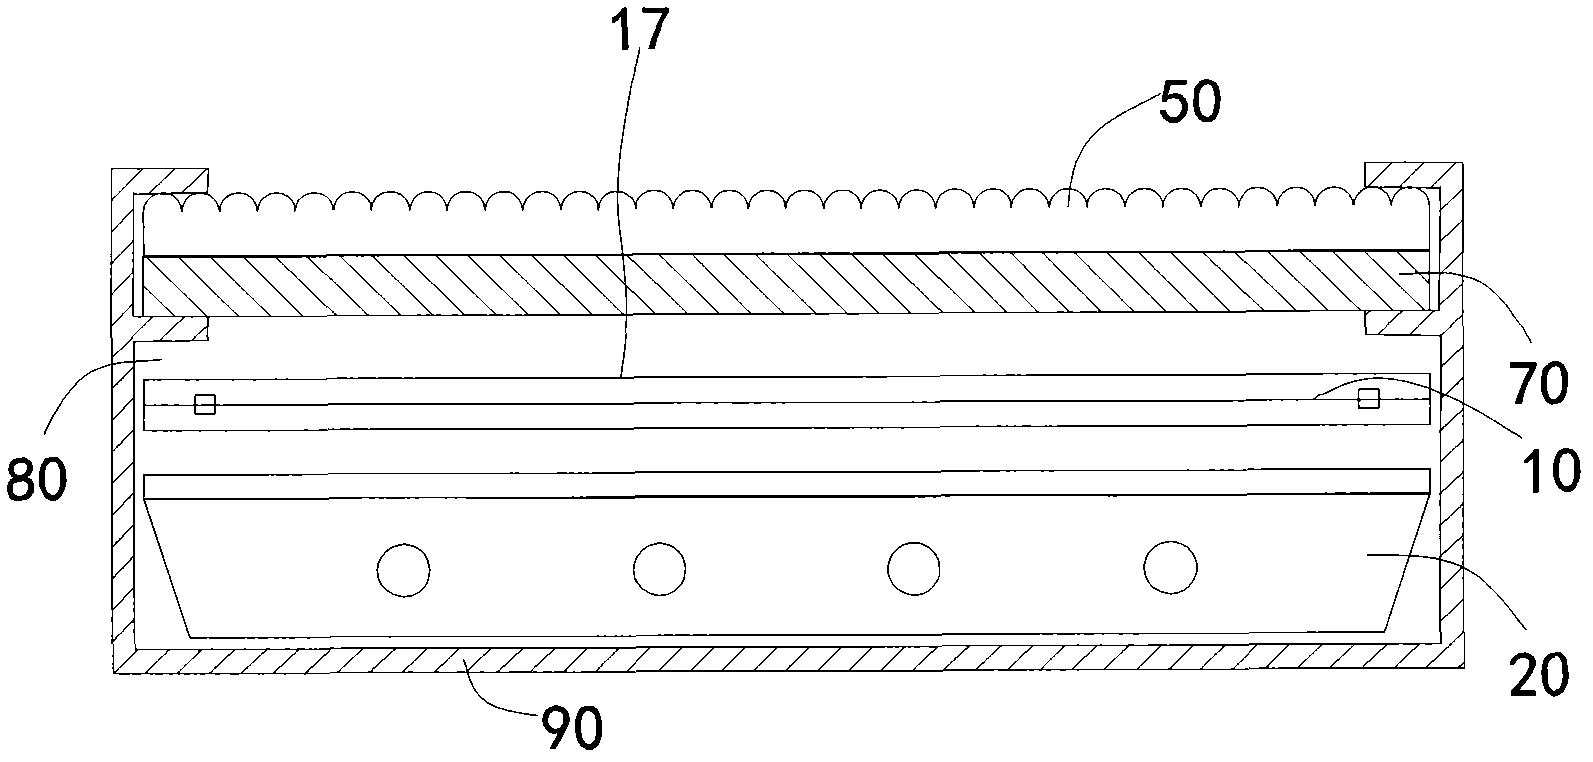 Stereo image display device